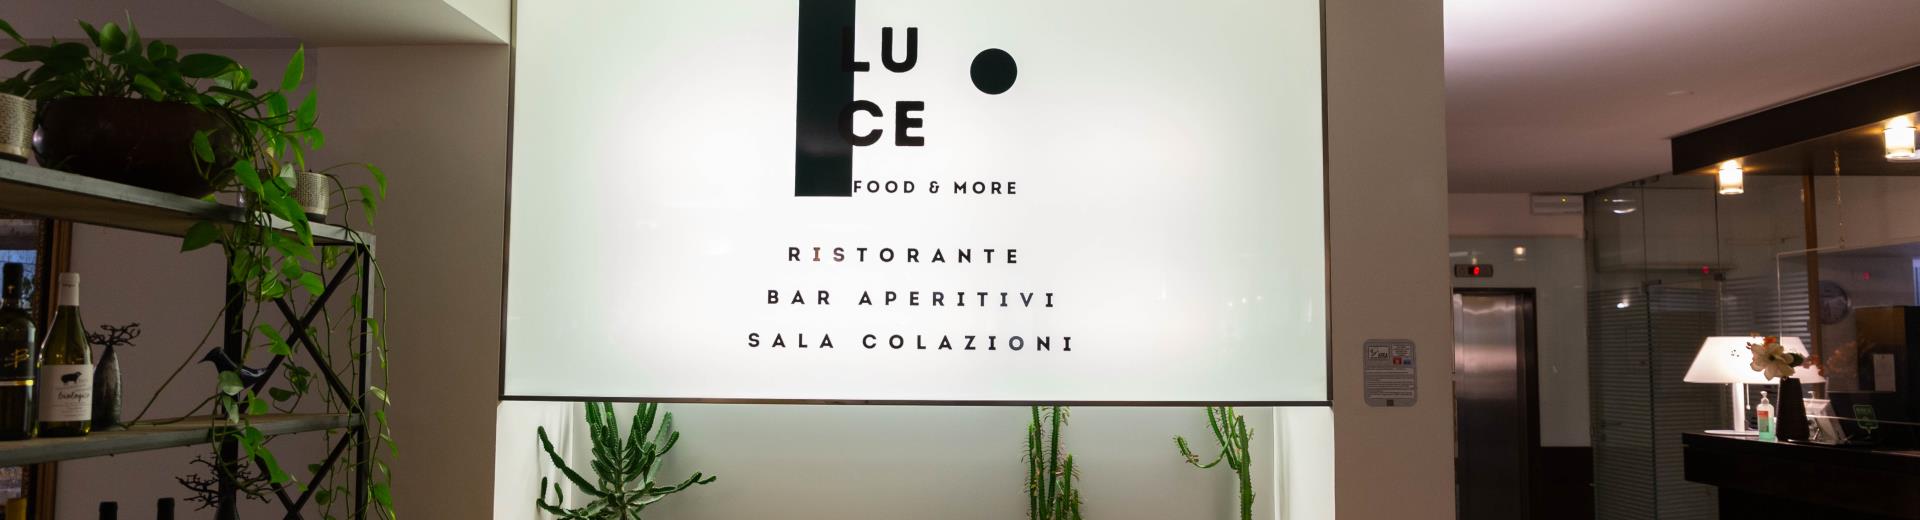 Luce - Food & More